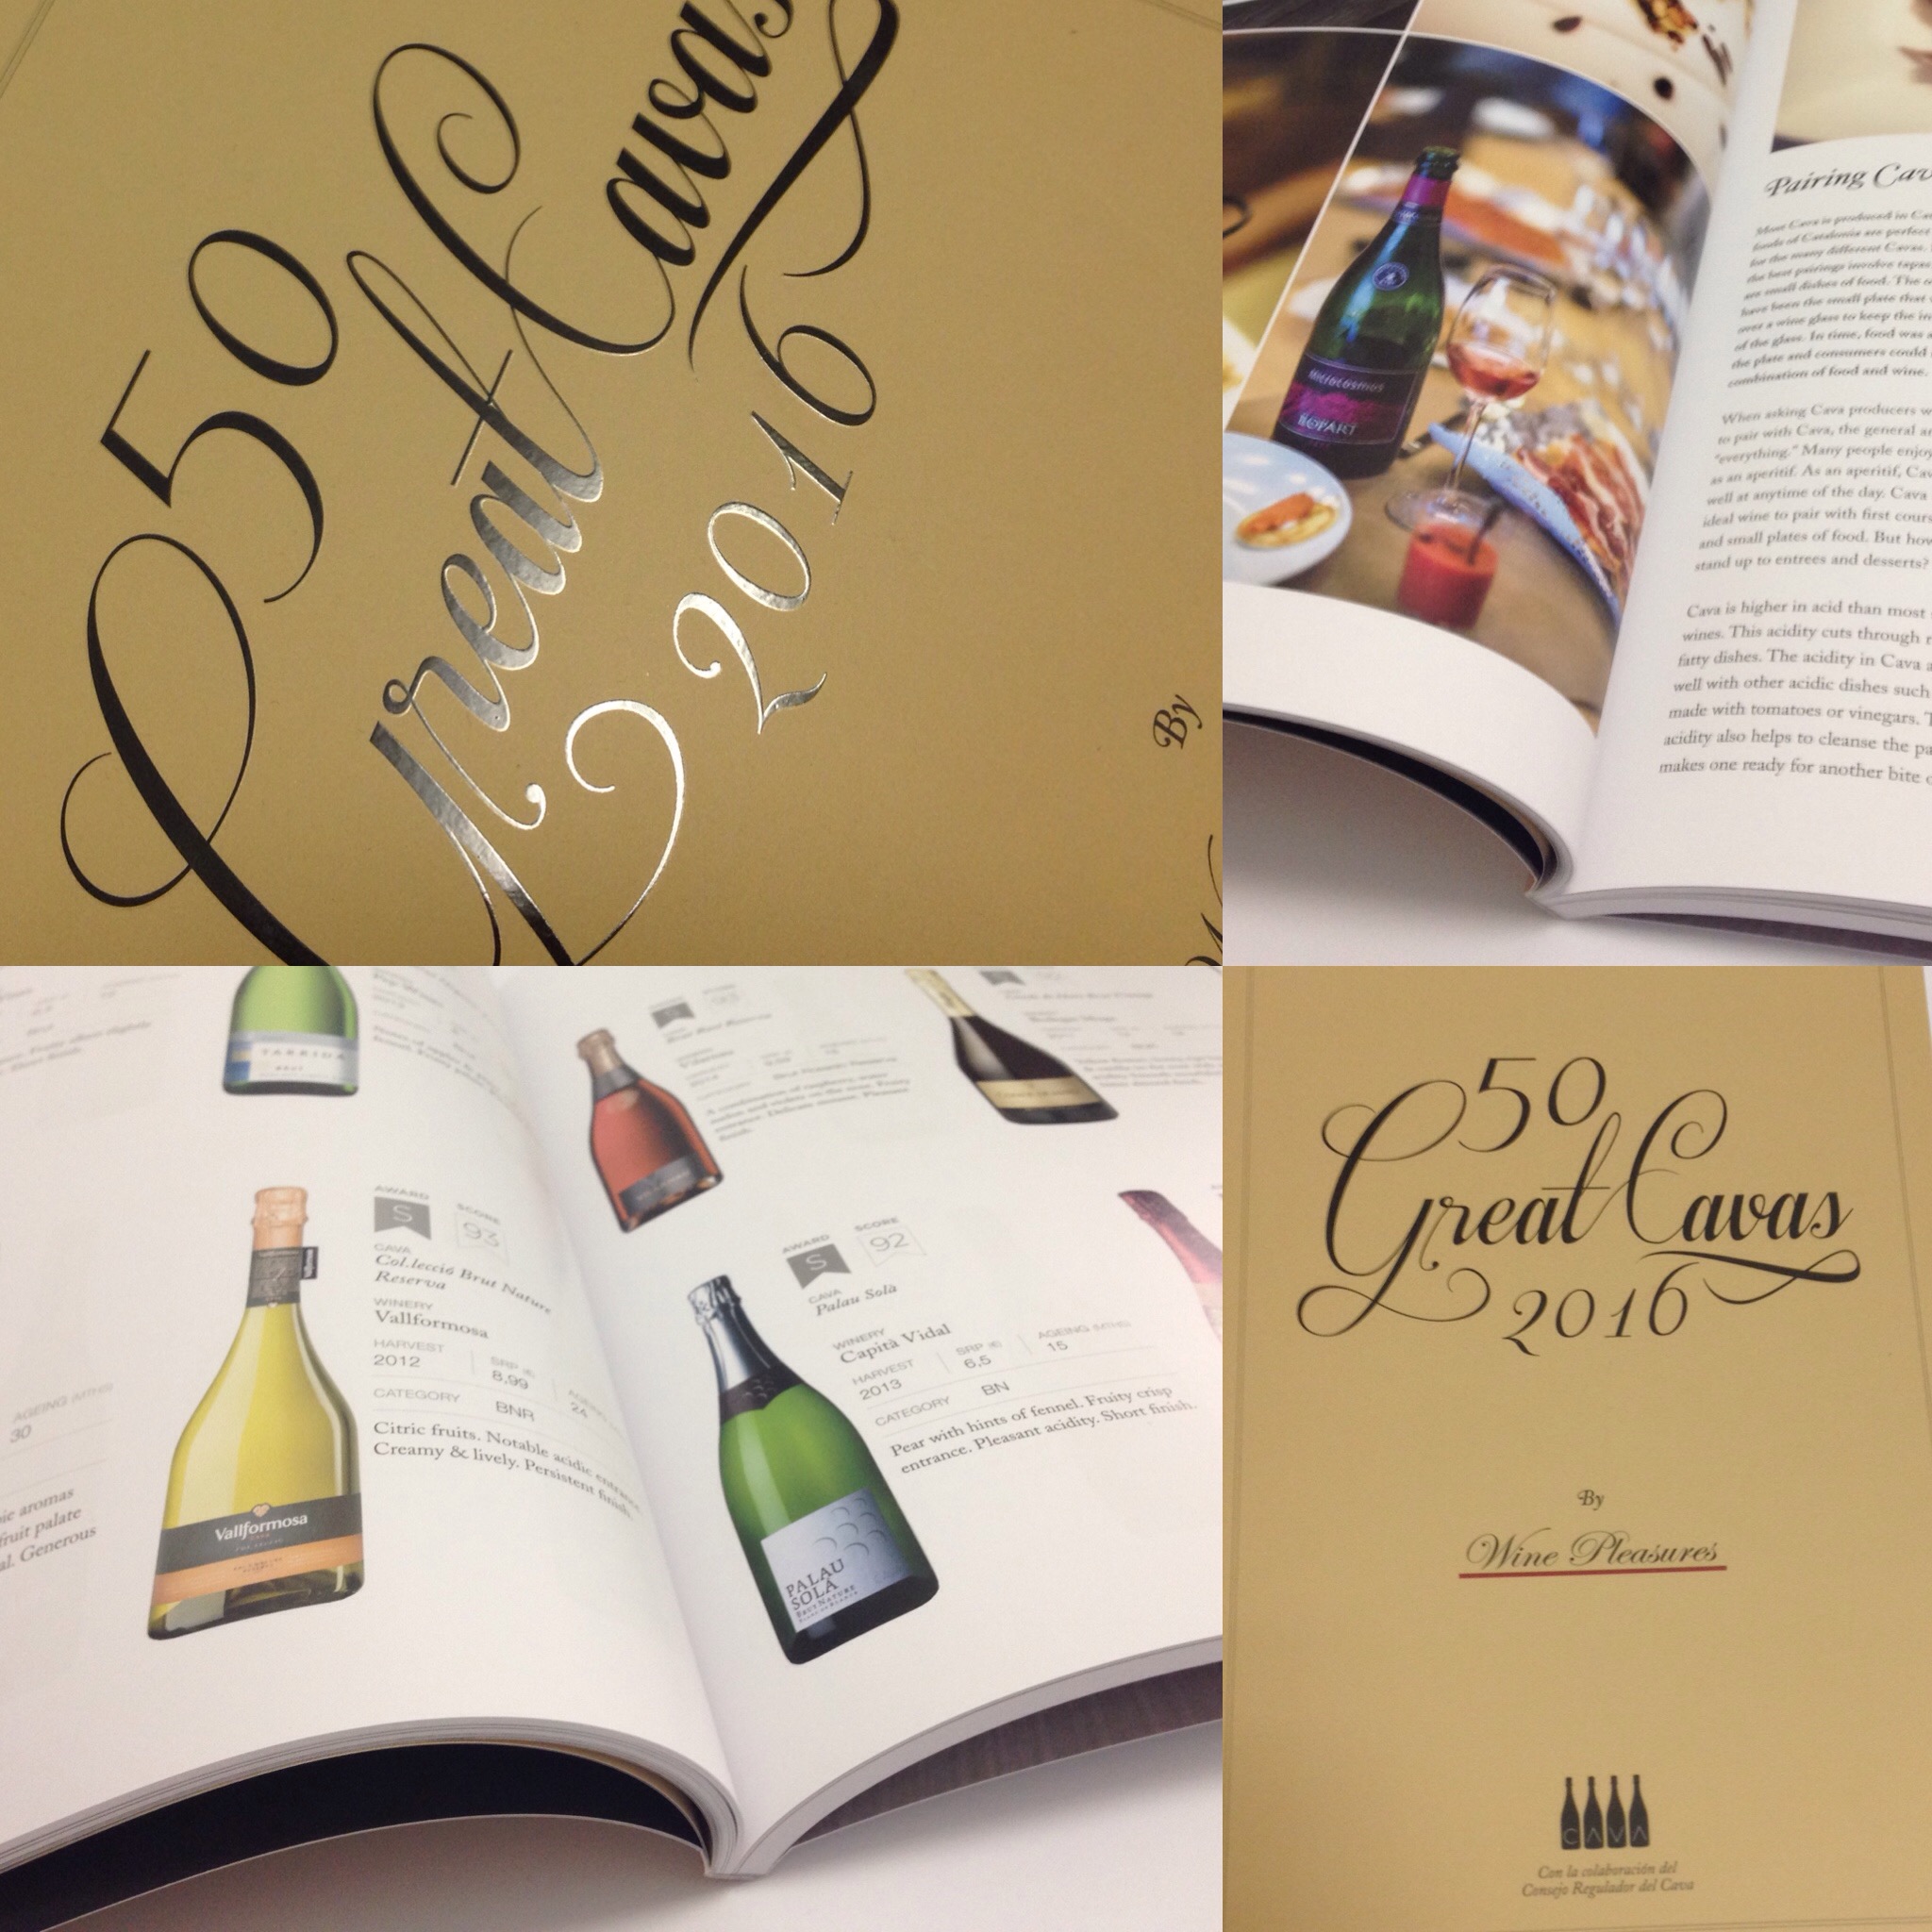 50 Great Cavas: A Sumptuous Guide to Spanish Sparkling Wine